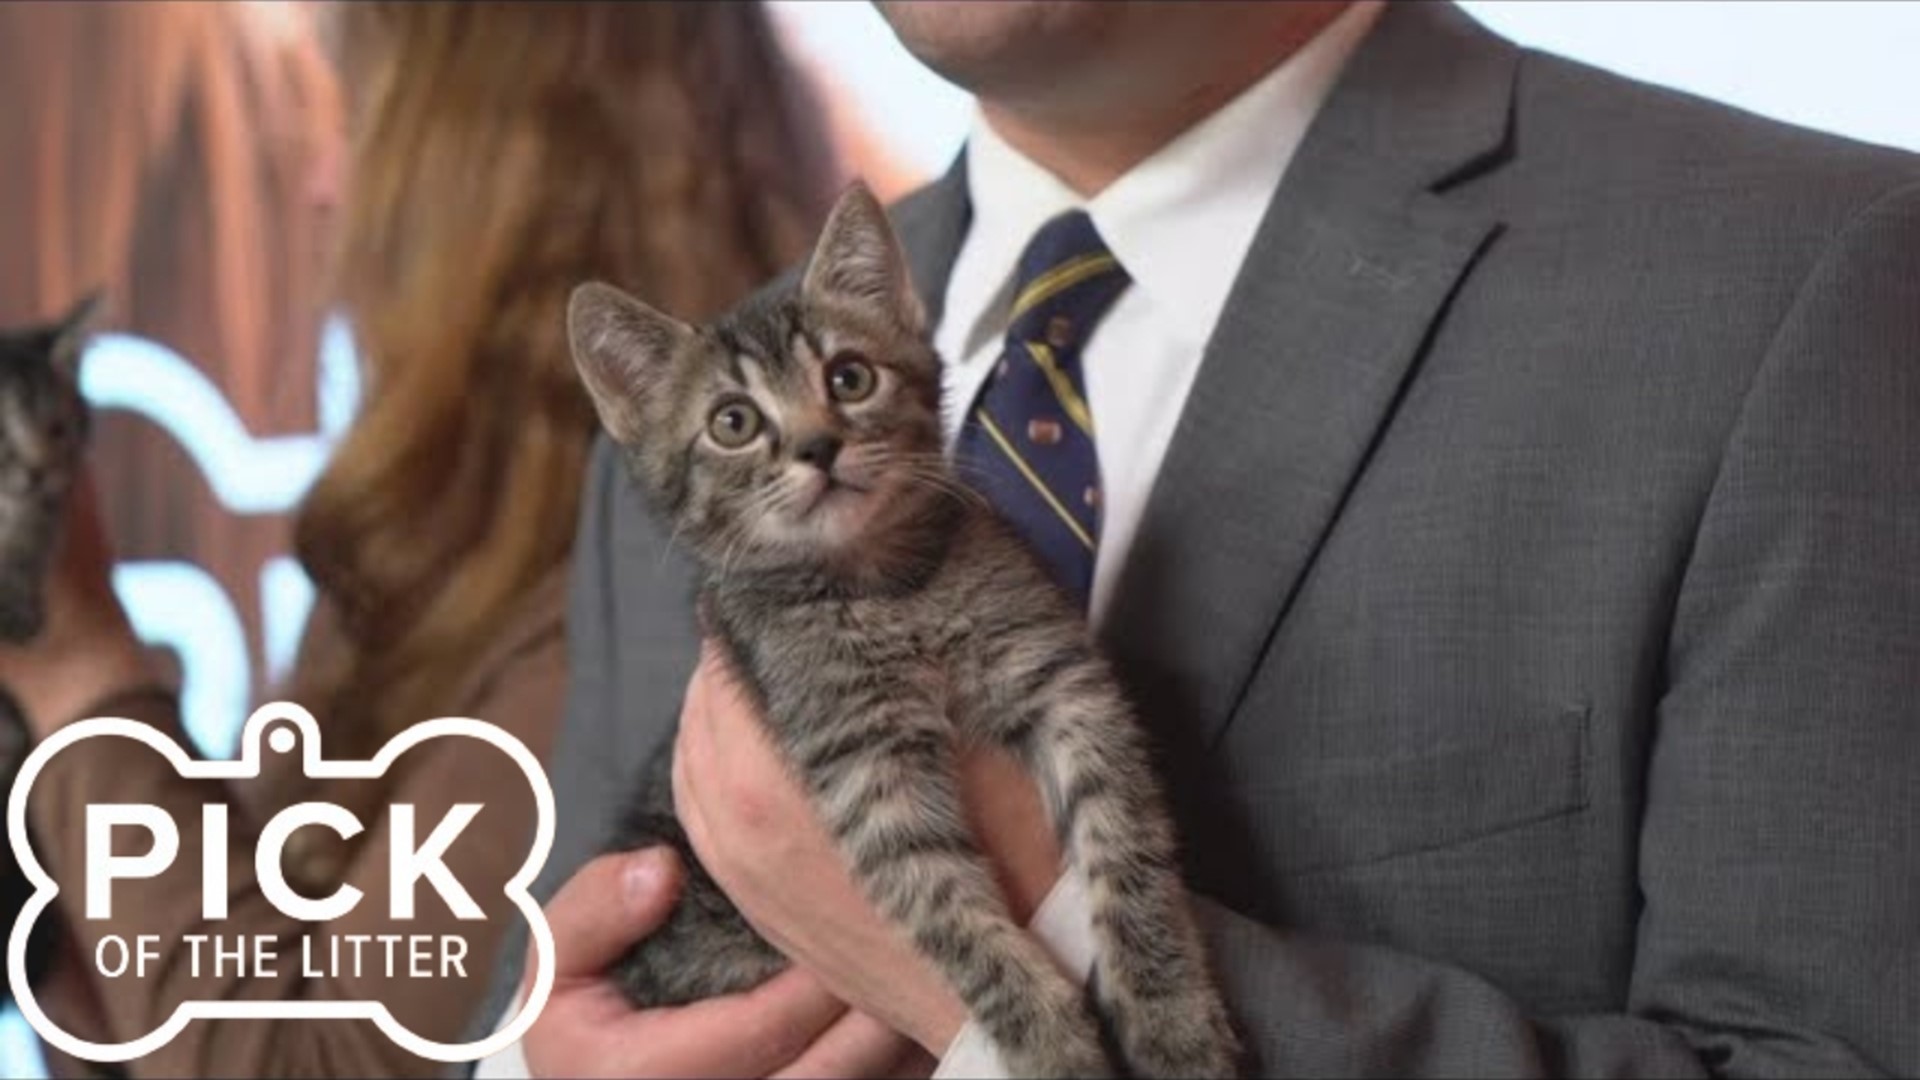 SpokAnimal is gearing up for its annual kitten shower, so we got to meet just a few of the adorable kittens your donations will help.